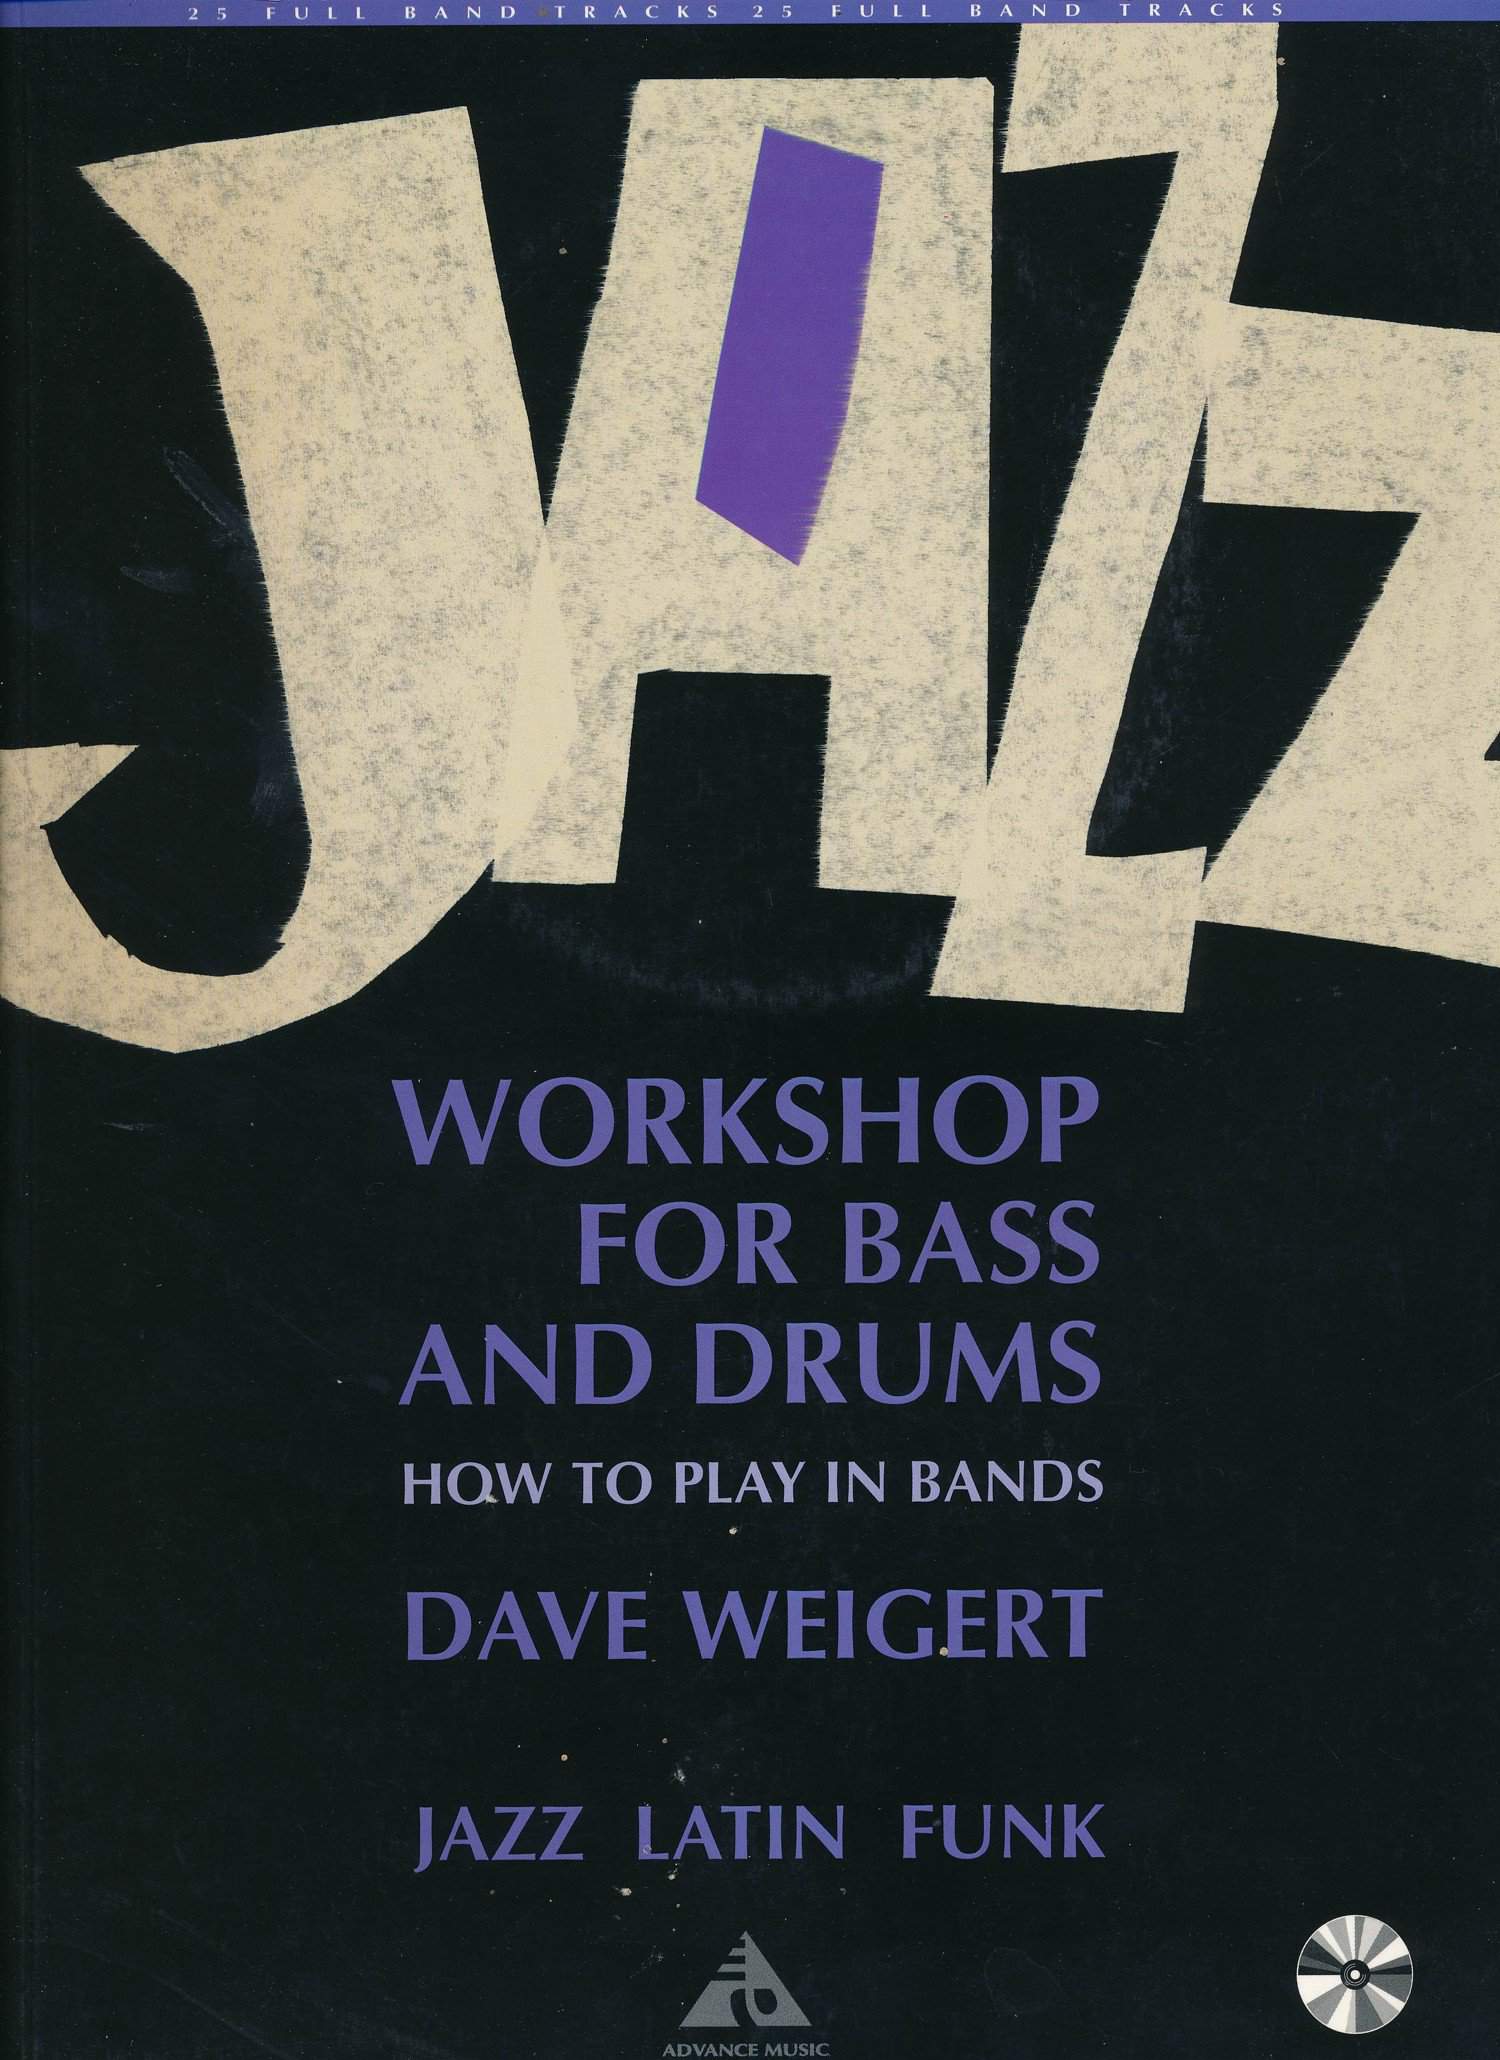 Jazz Workshop For Bass And Drums, How To Play In Bands by Dave Weigert